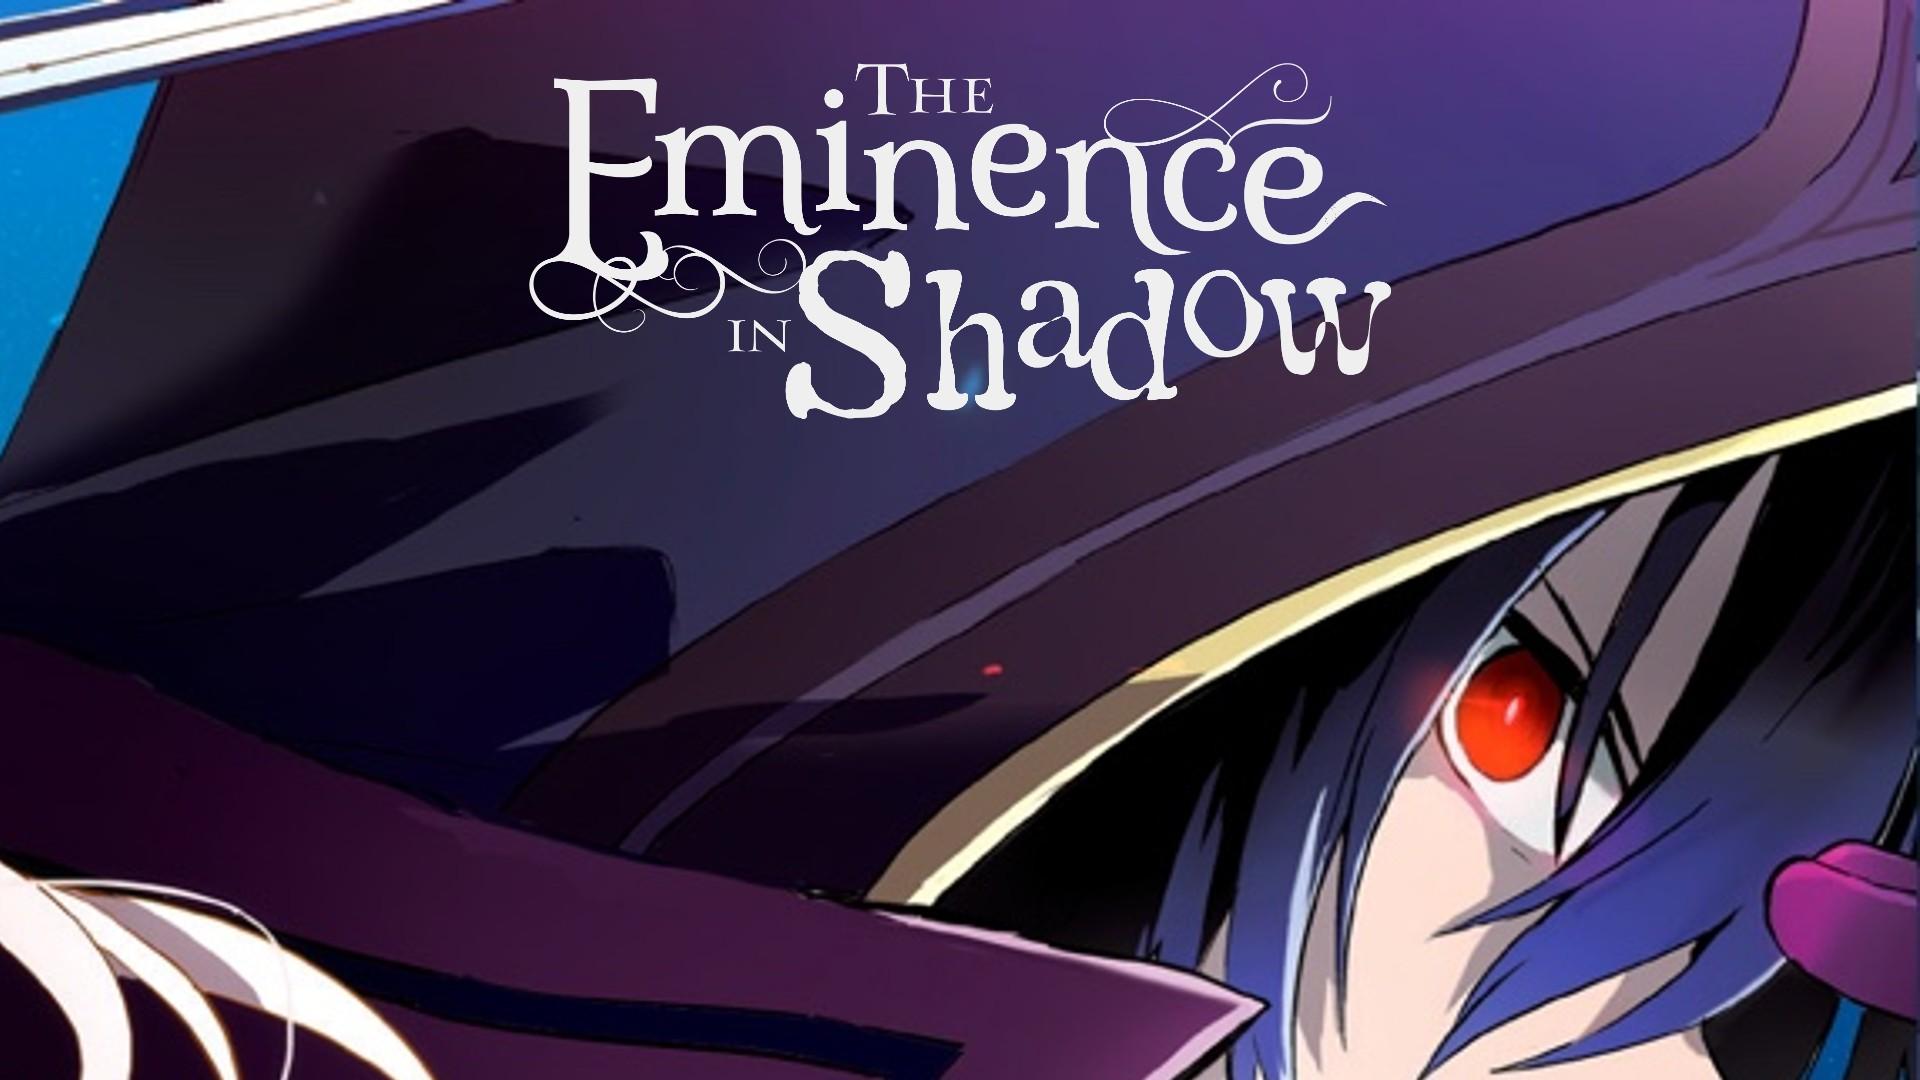 10+ Beta (The Eminence in Shadow) HD Wallpapers and Backgrounds